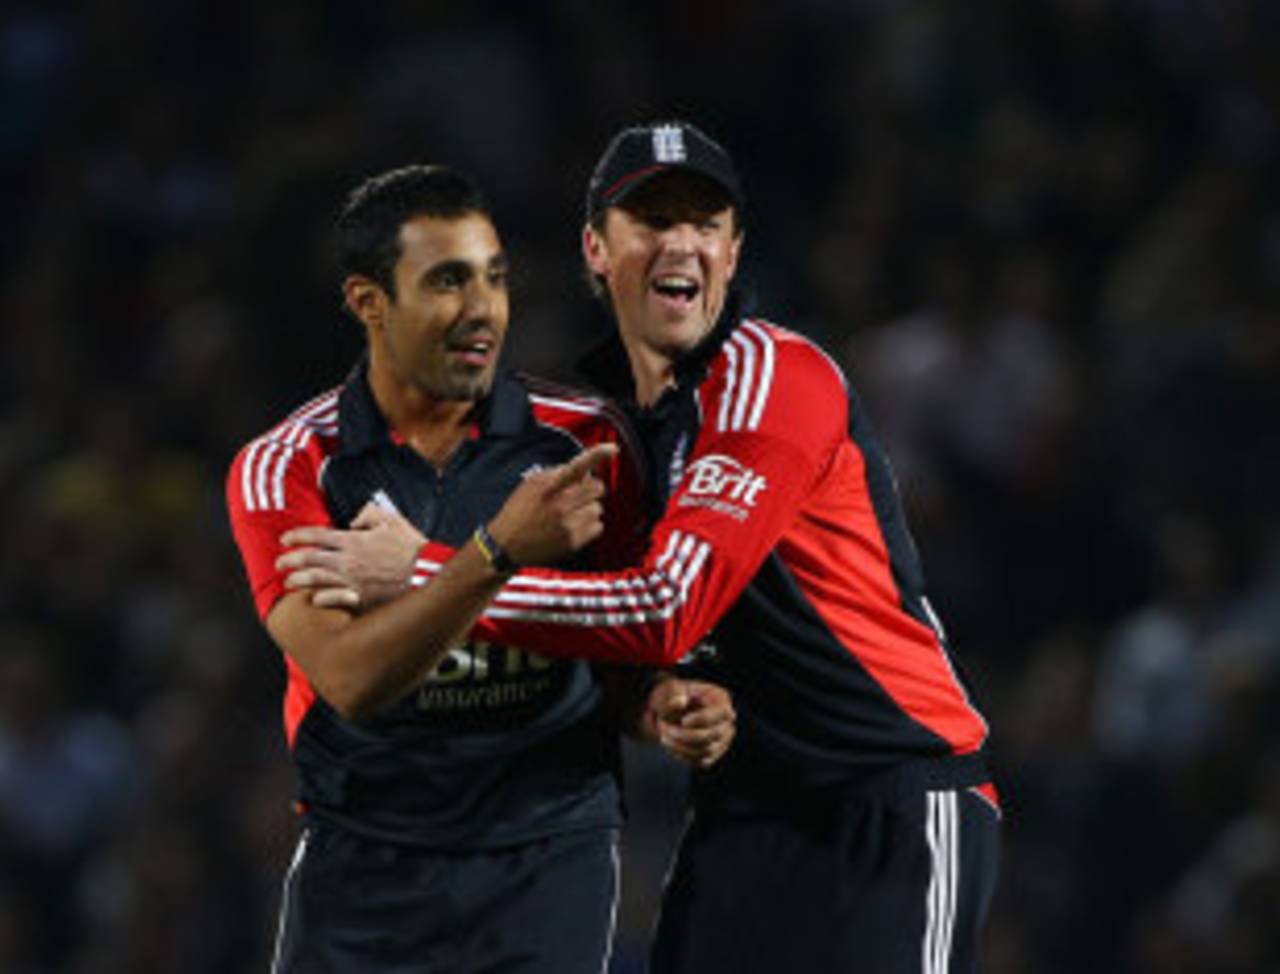 Ravi Bopara appears to have cemented a spot in England's one-day team&nbsp;&nbsp;&bull;&nbsp;&nbsp;Getty Images